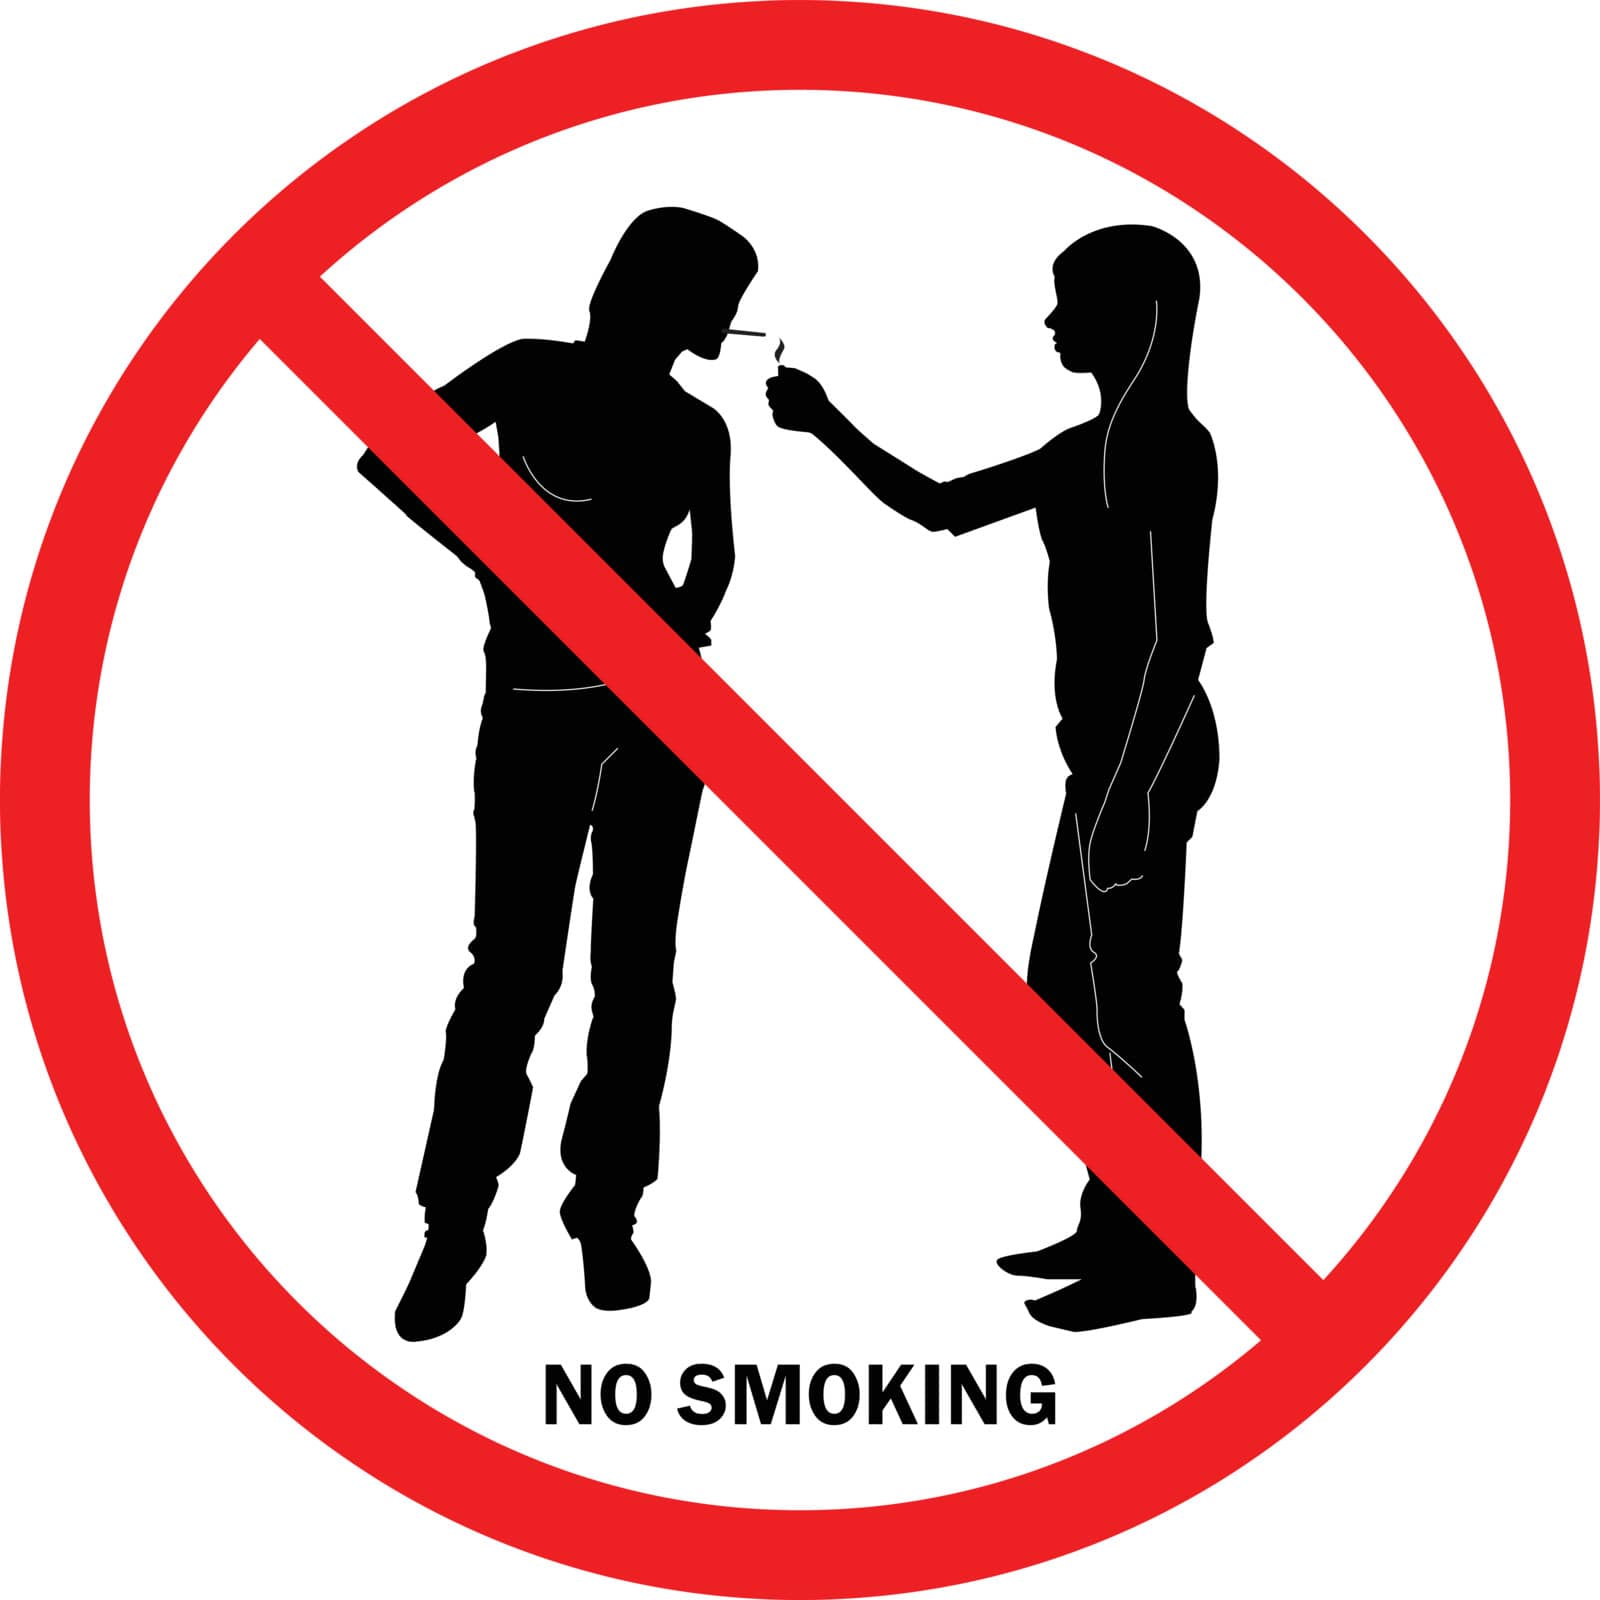 Sign NO SMOKING with two young ladies in red round